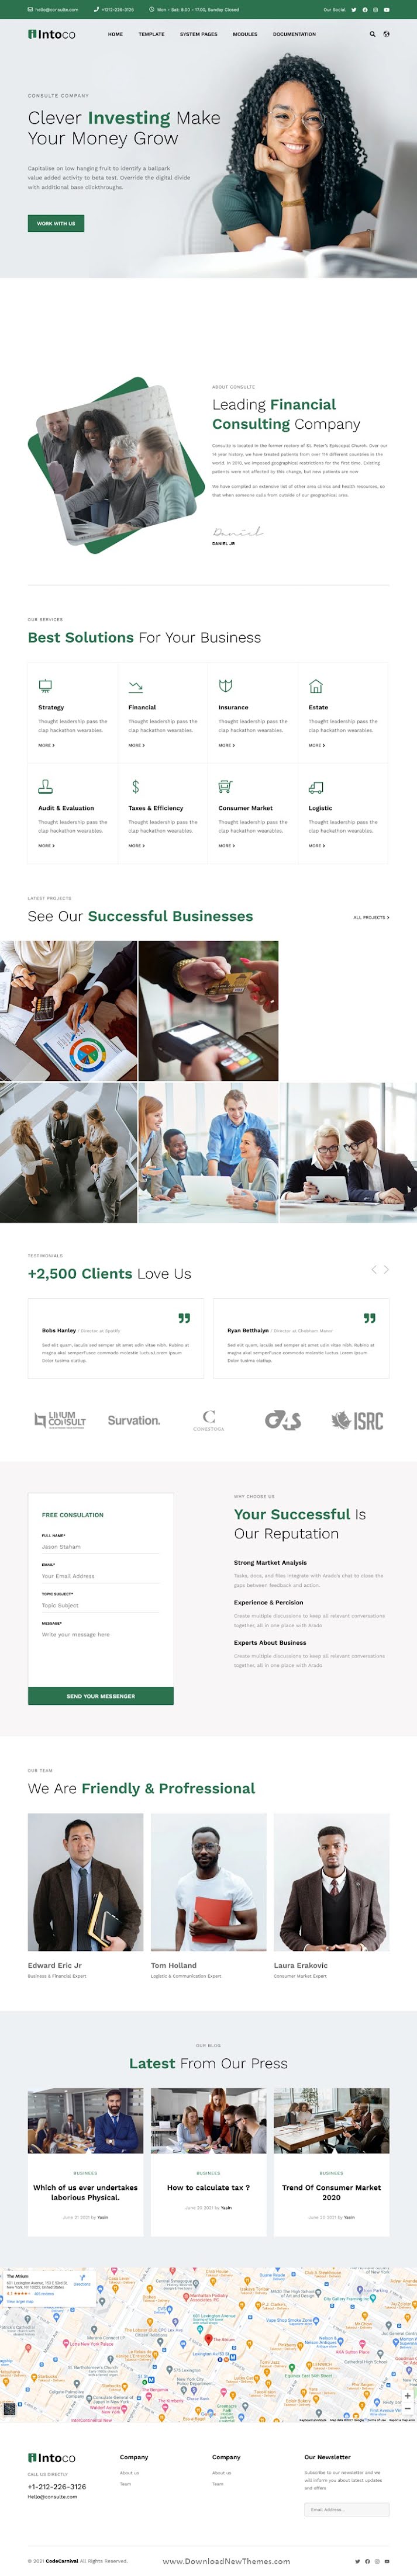 Intoco - Investment Company HubSpot Theme